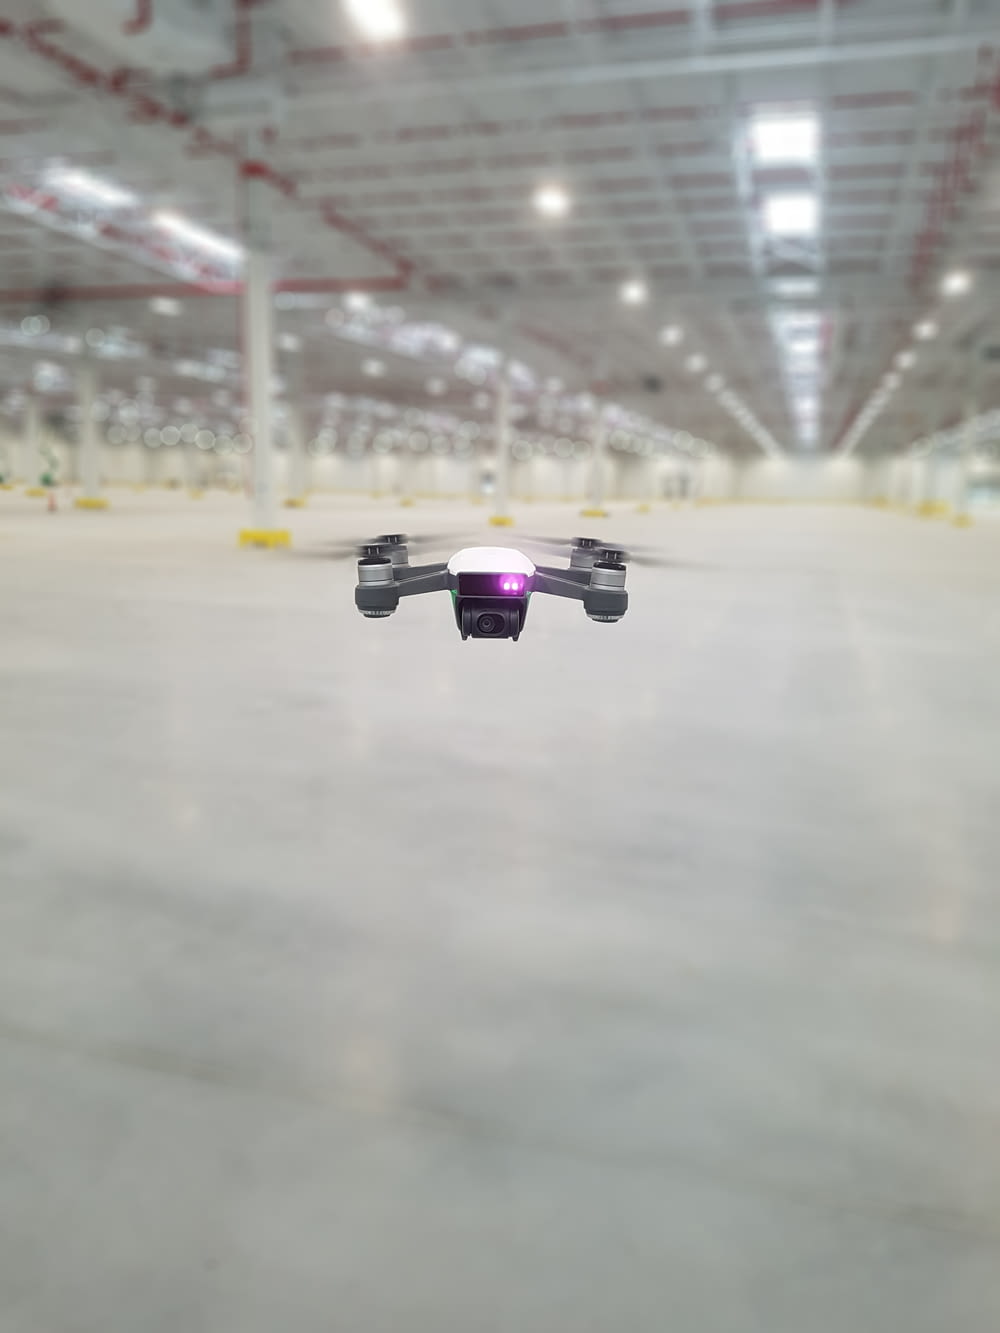 a small remote controlled flying in a warehouse